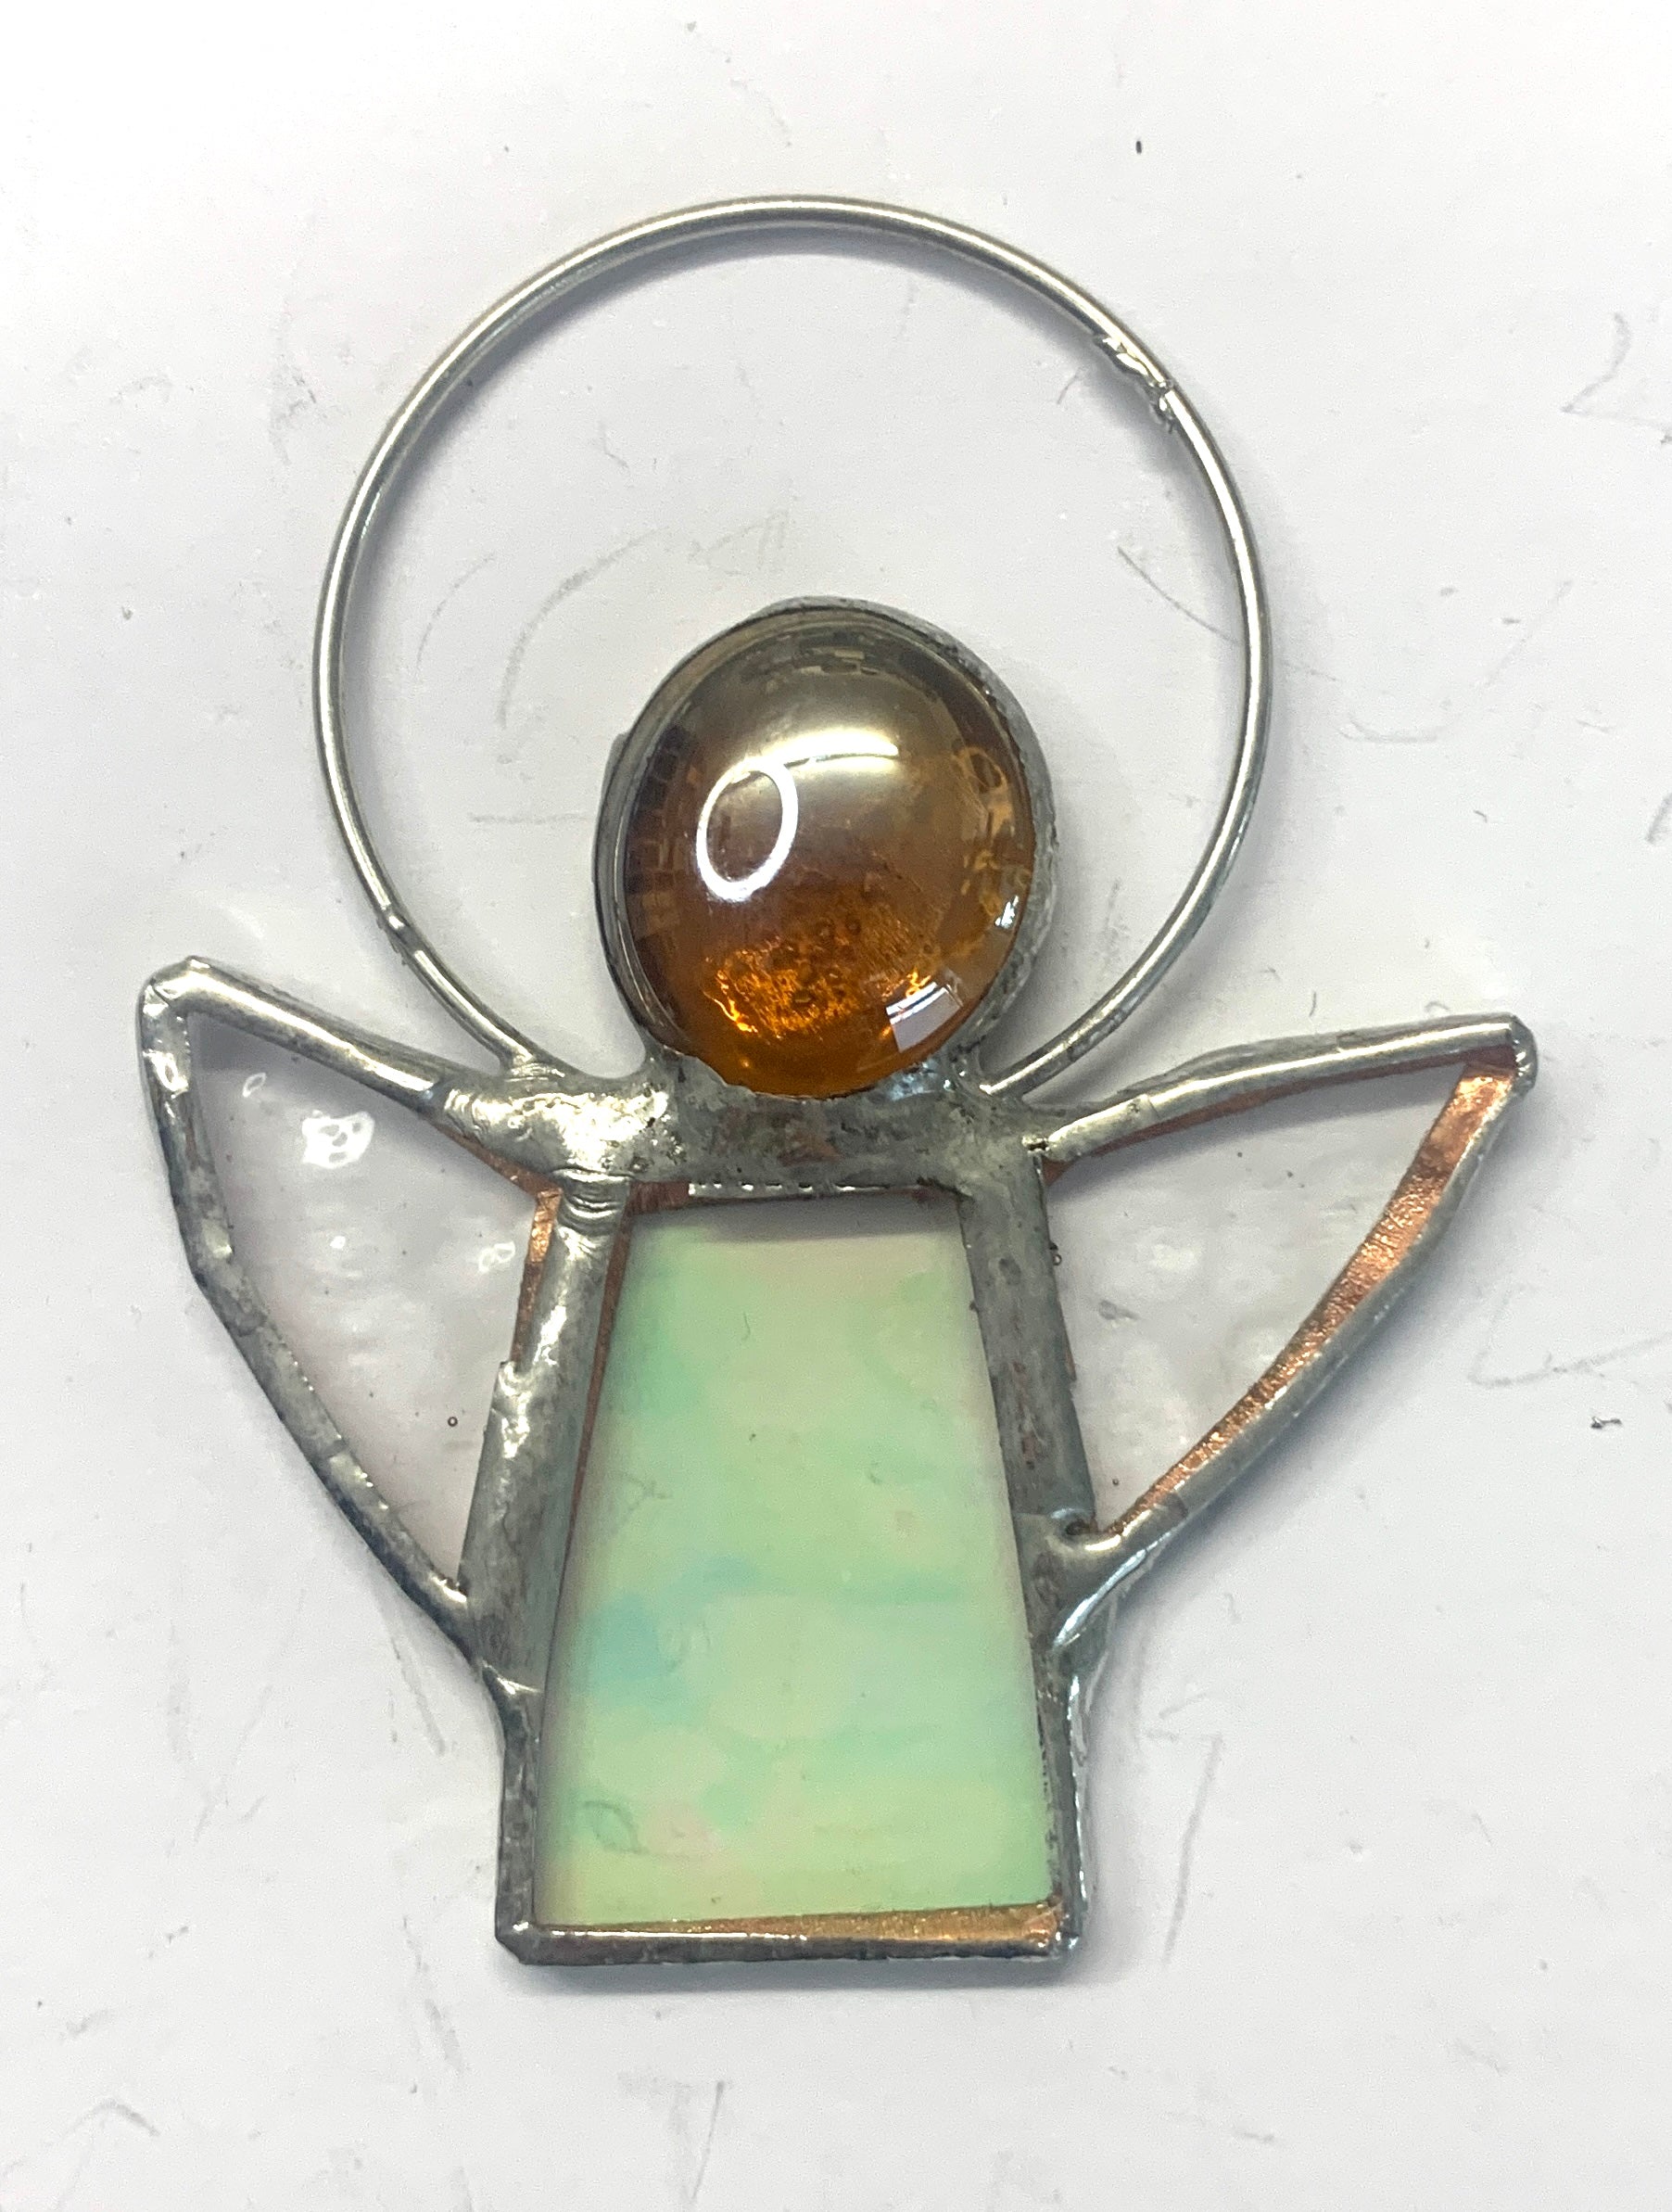 Stained Glass Angels. Individually made by hand. Many colour choices and variations. A choice of a clear or amber nugget head.  The glass texture may vary slightly from the photographs.  The clear glass wings will vary in texture too.  Size 5cm x 7cm including halo.  Glass is cut to shape and copperfoiled, followed by soldering all the pieces together.  Handmade by Dadswell Glass at Glass Designs in Bristol.